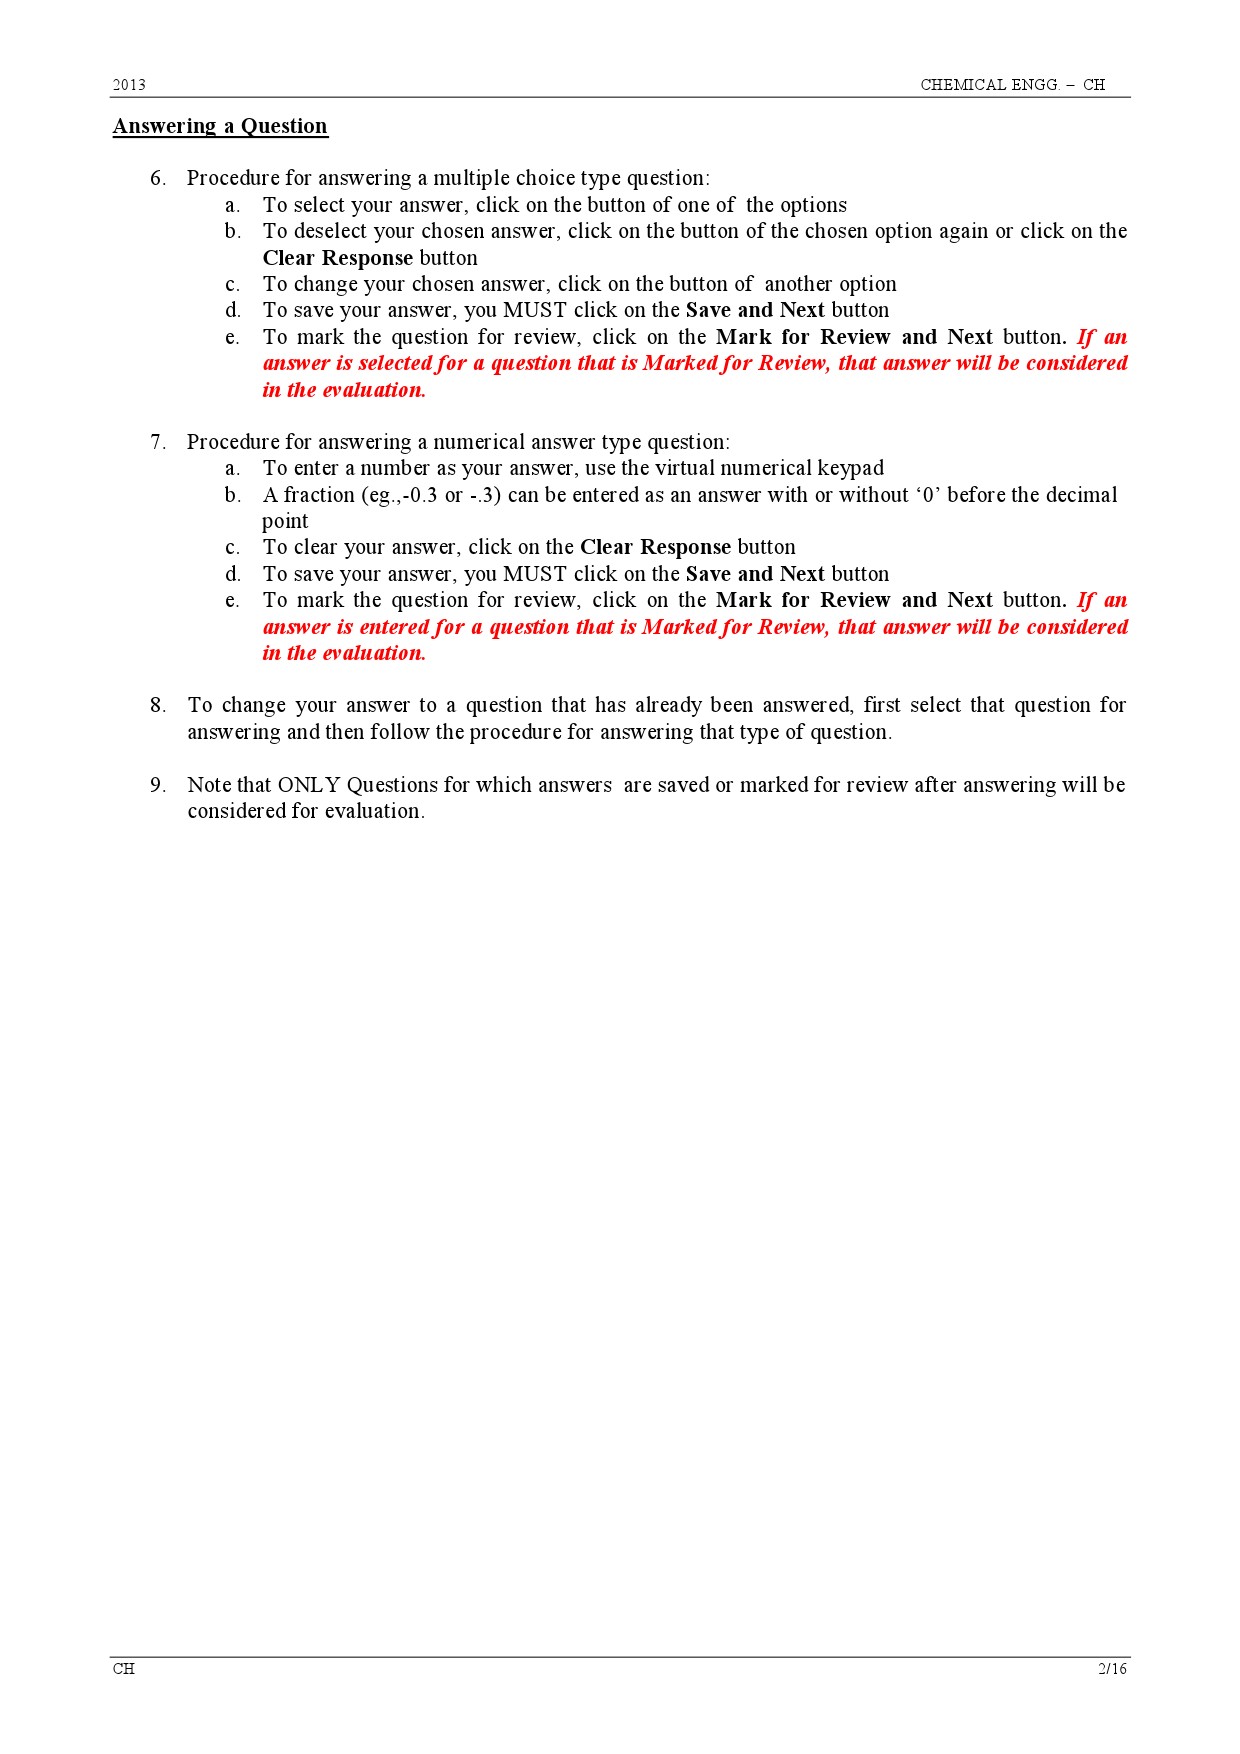 GATE Exam Question Paper 2013 Chemical Engineering 2